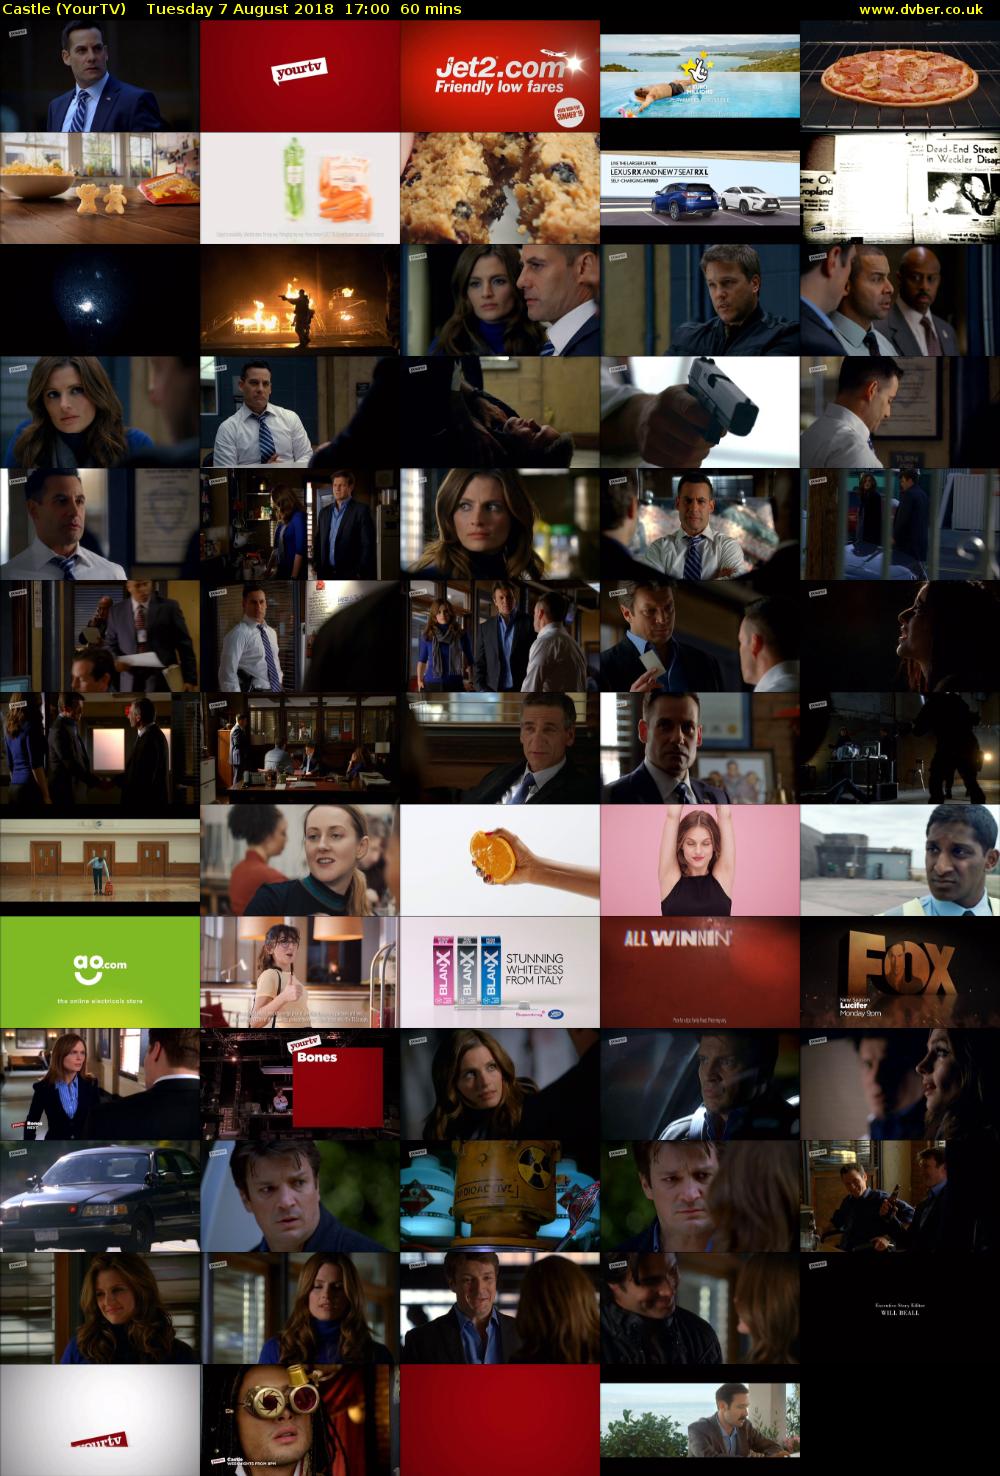 Castle (YourTV) Tuesday 7 August 2018 17:00 - 18:00